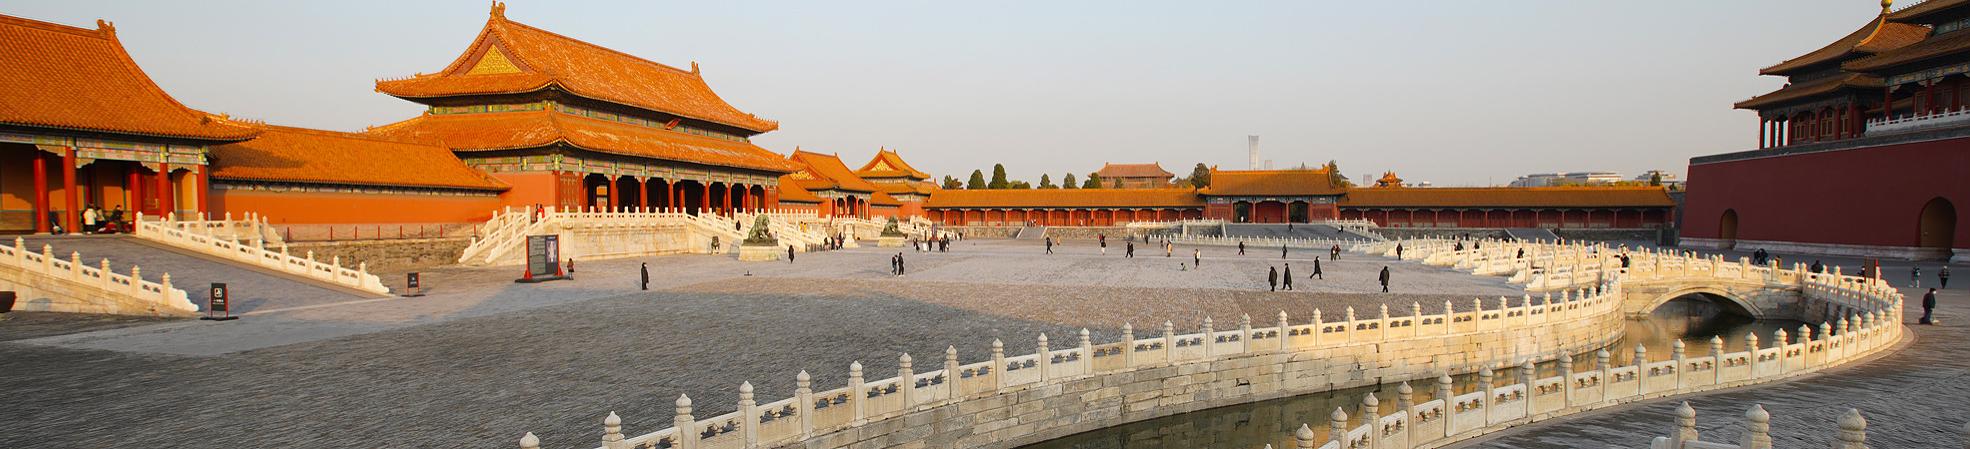 Beijing Hutongs - History and Lifestyle 